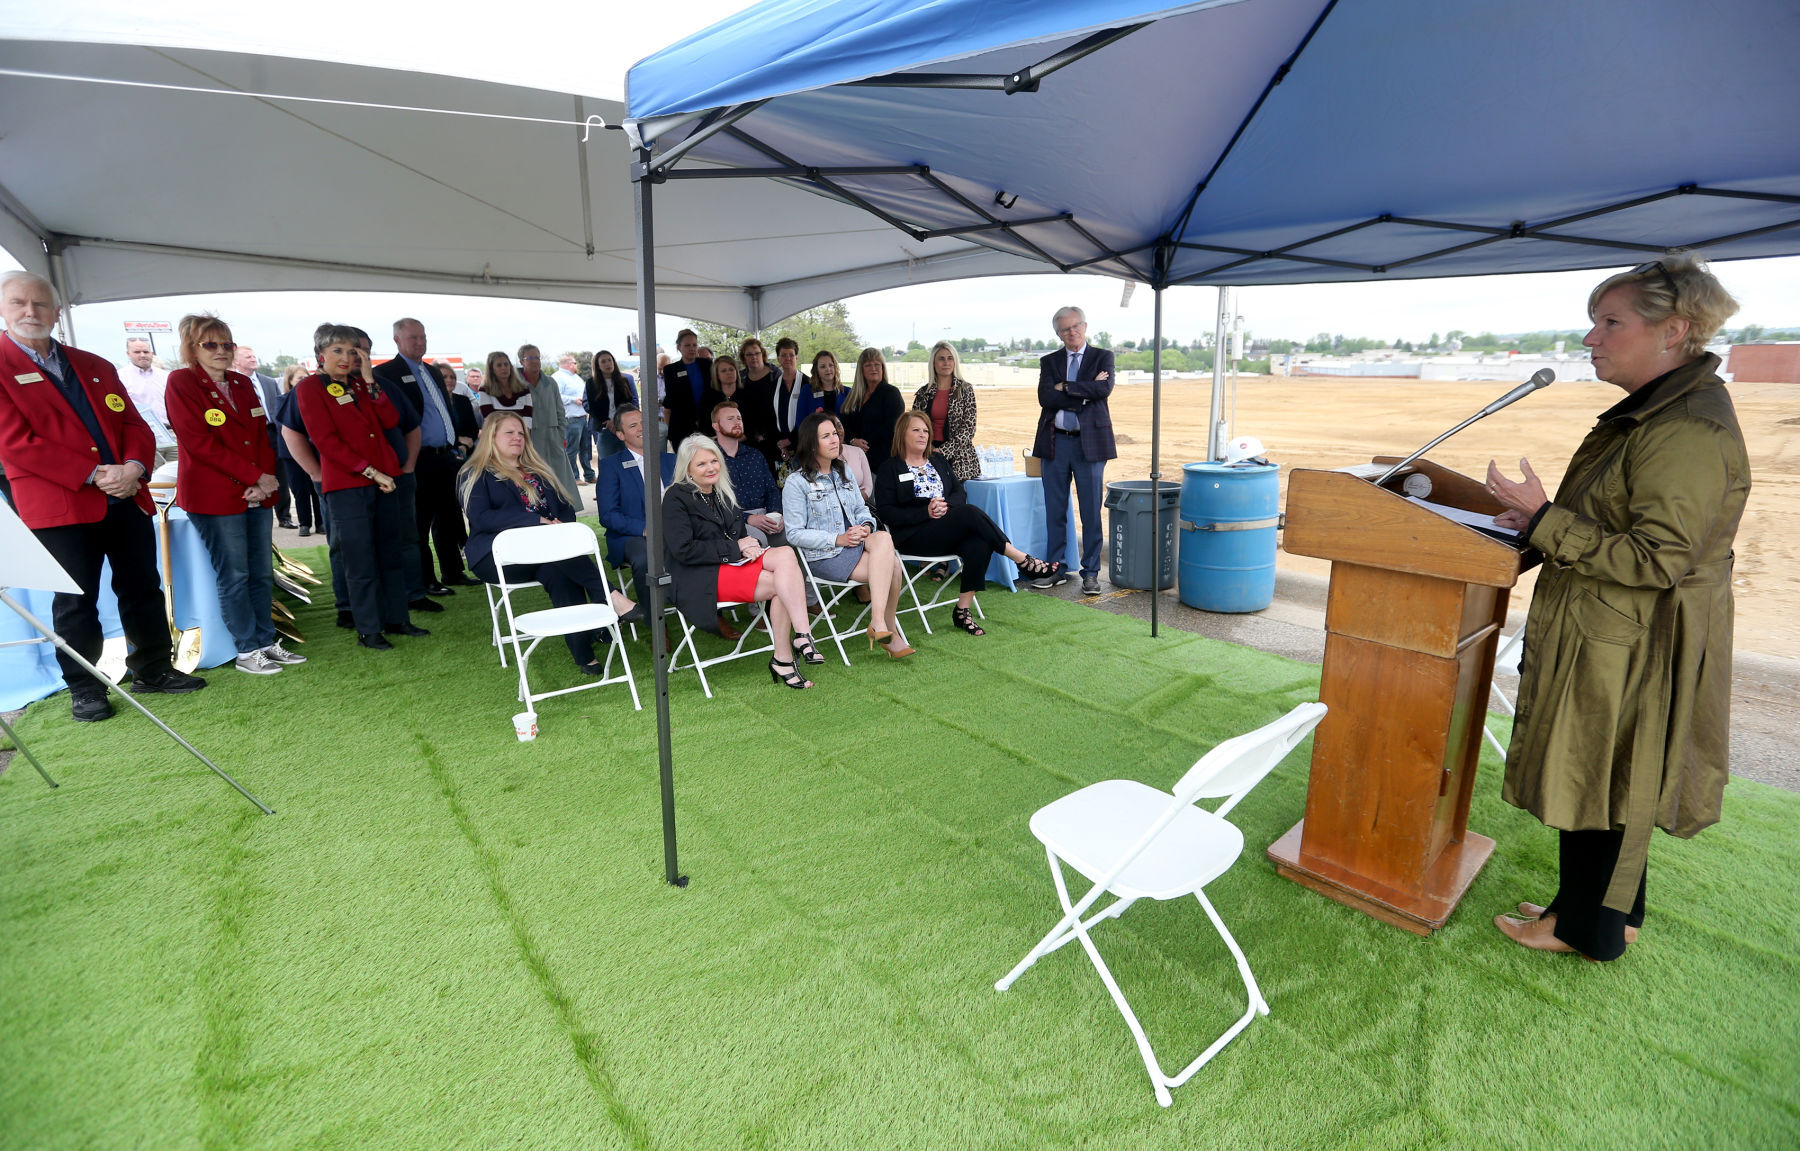 Molly Grover, president and CEO of Dubuque Area Chamber of Commerce, speaks during a groundbreaking for Collins Community Credit Union